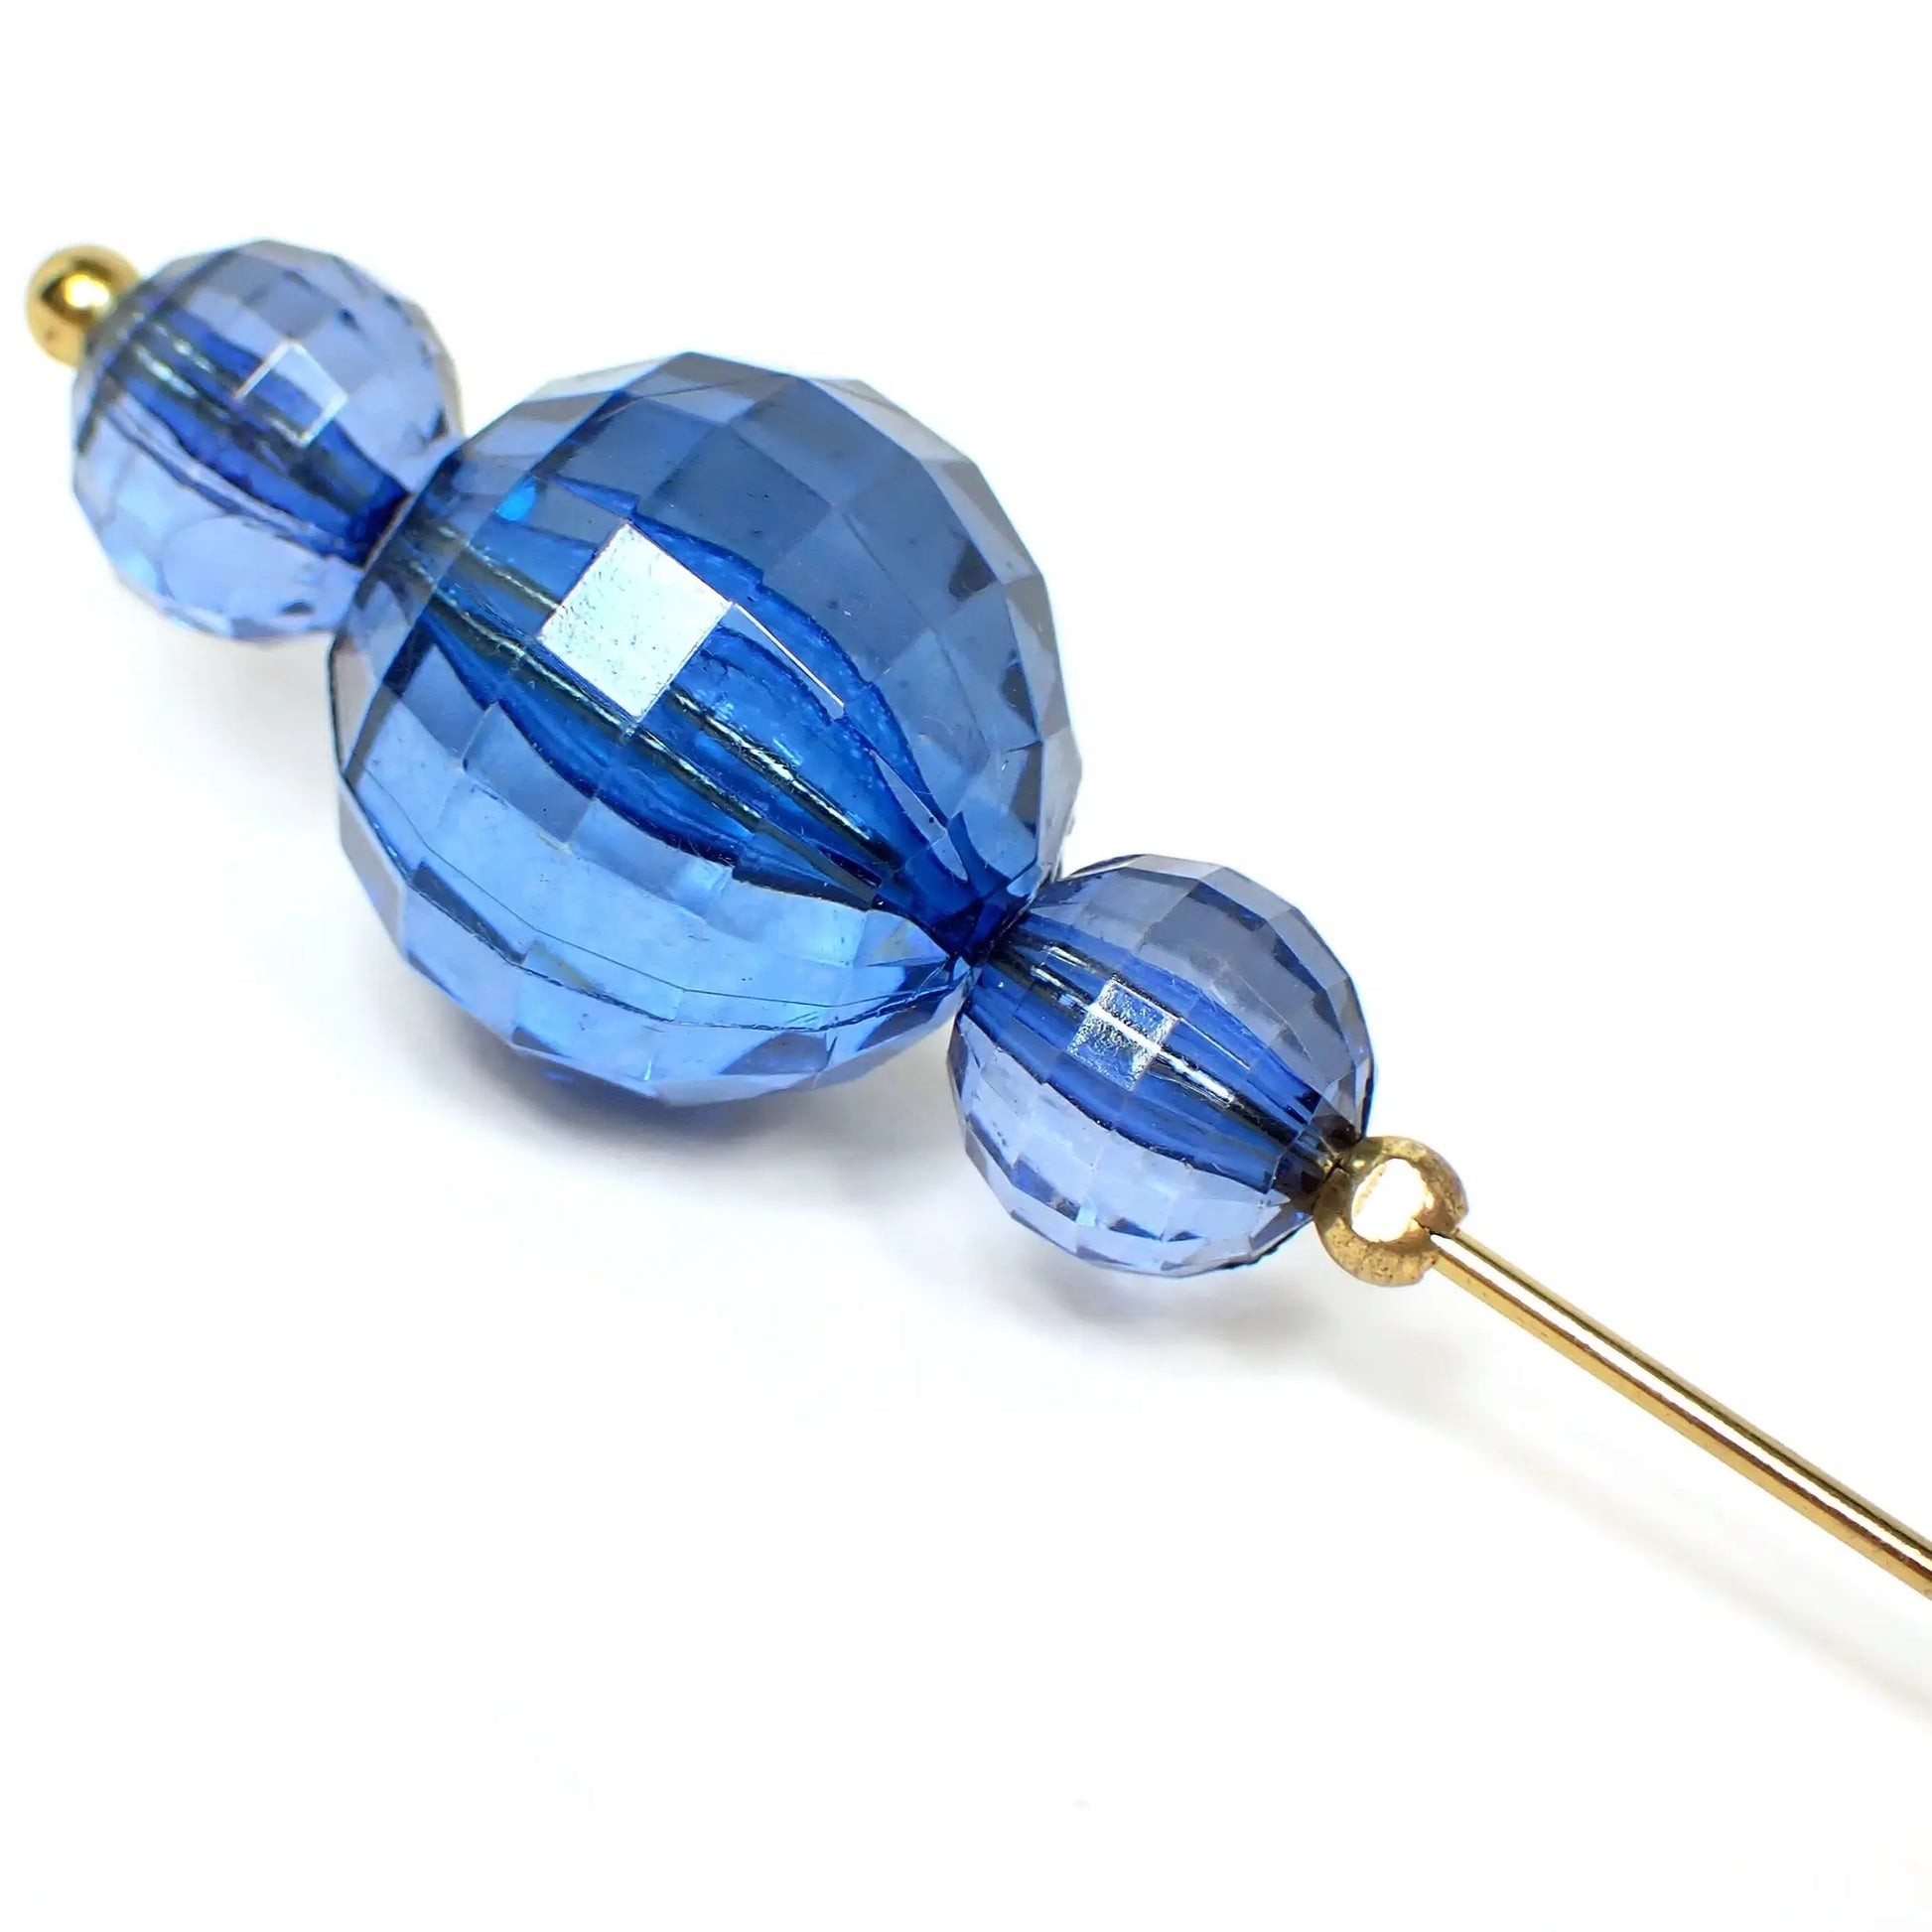 Enlarged view of the top of the Mid Century vintage beaded hat pin. The metal is antiqued gold in color. There are three faceted translucent blue plastic beads. They are all round in shape with the largest bead in the middle. 